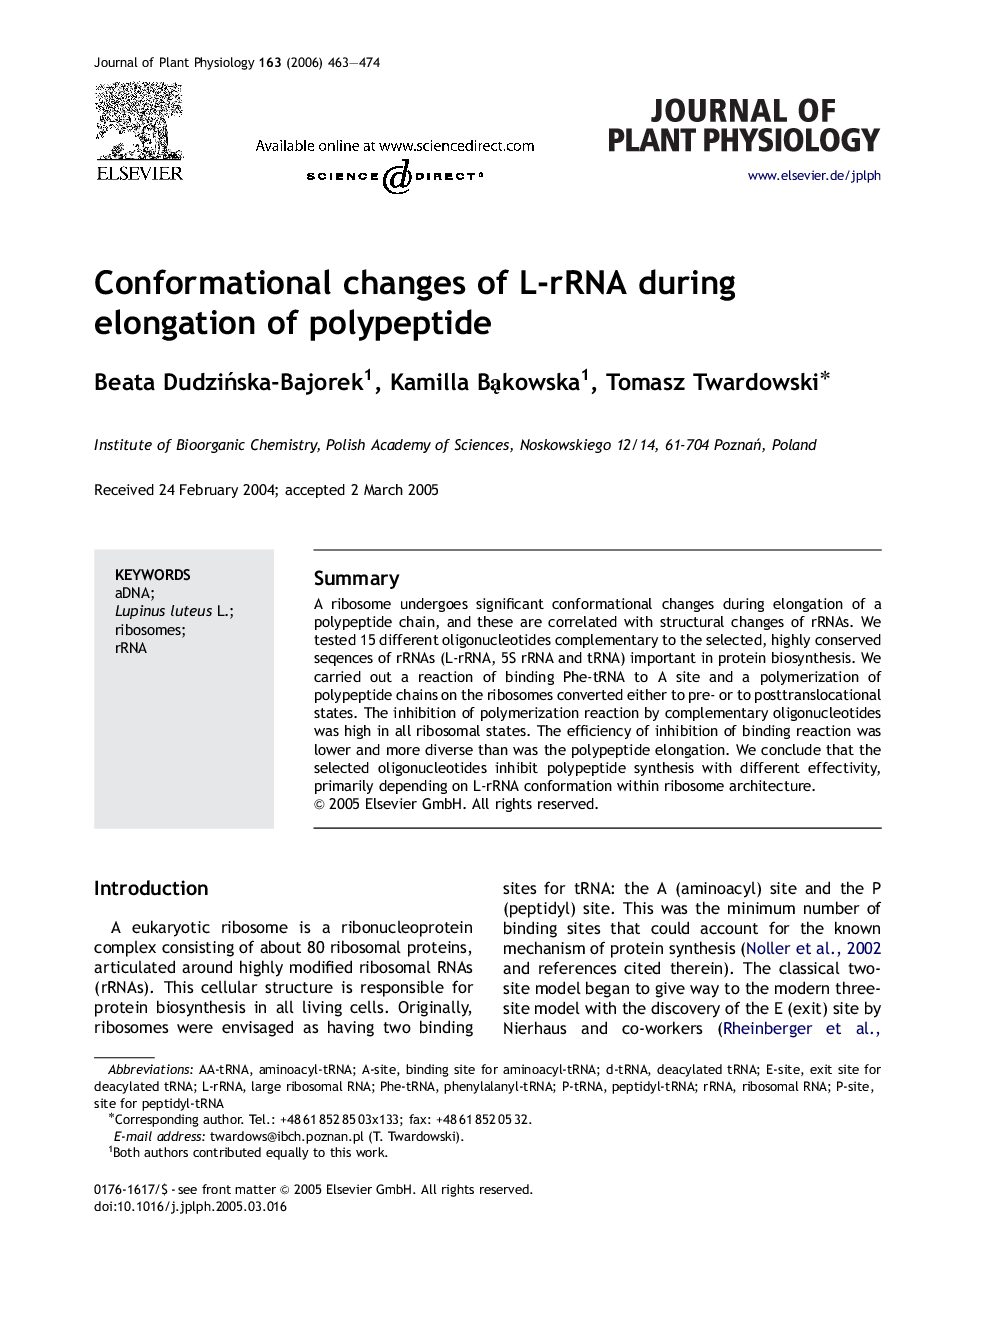 Conformational changes of L-rRNA during elongation of polypeptide